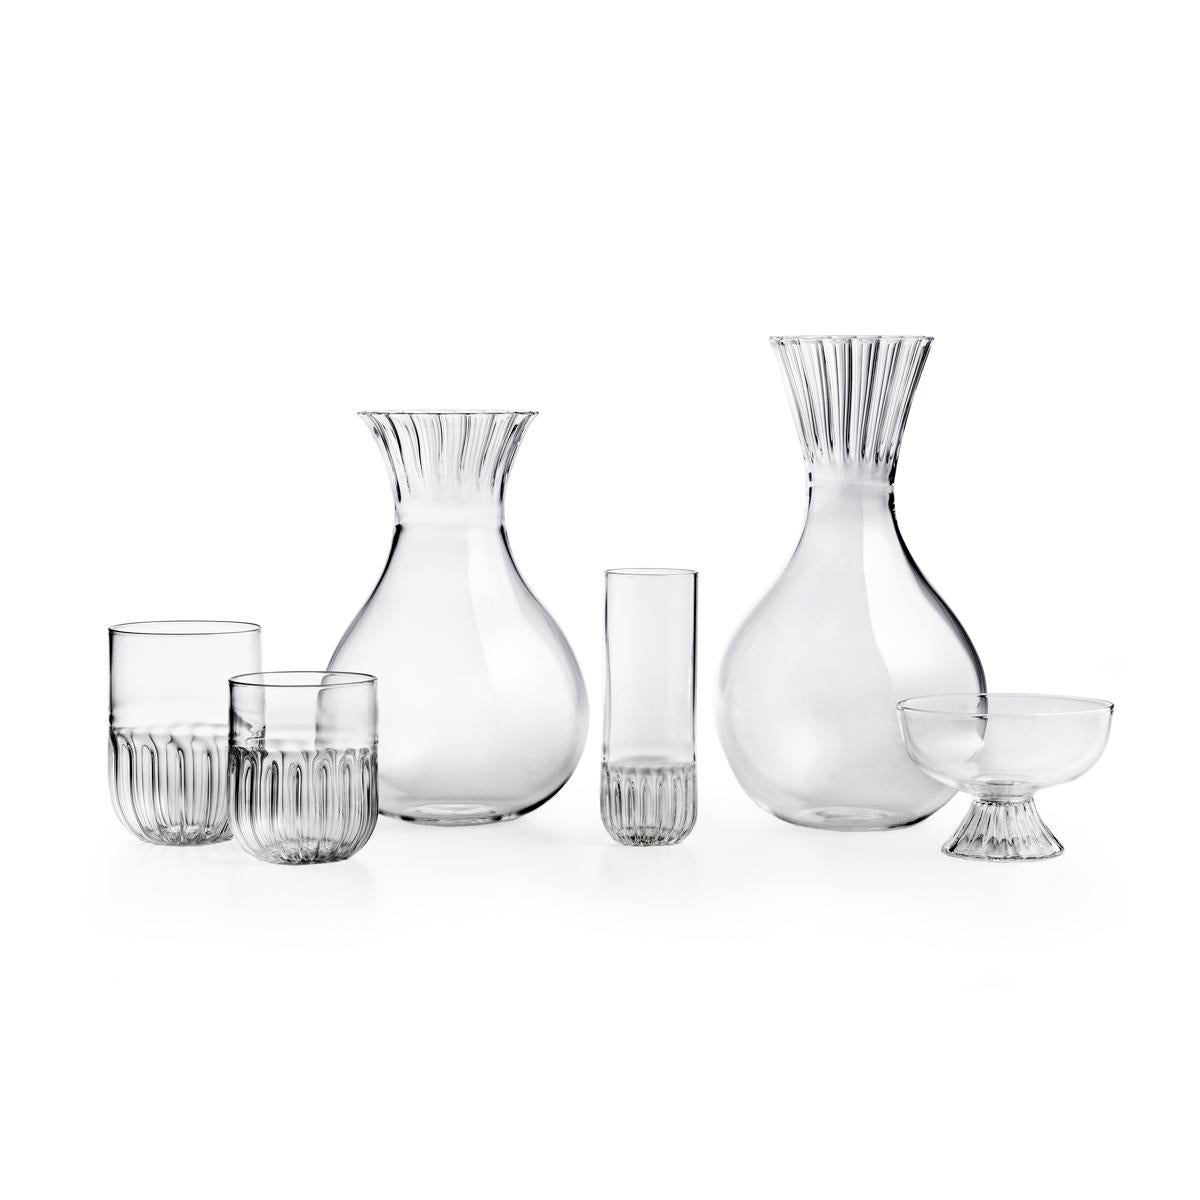 Low carafe in mouth blown glass. The routine collection is a glassware family designed by Matteo Cibic, who define it as “an essential collection for a smart daily life”. All the pieces of Routine, including this carafe, are handcrafted and feature